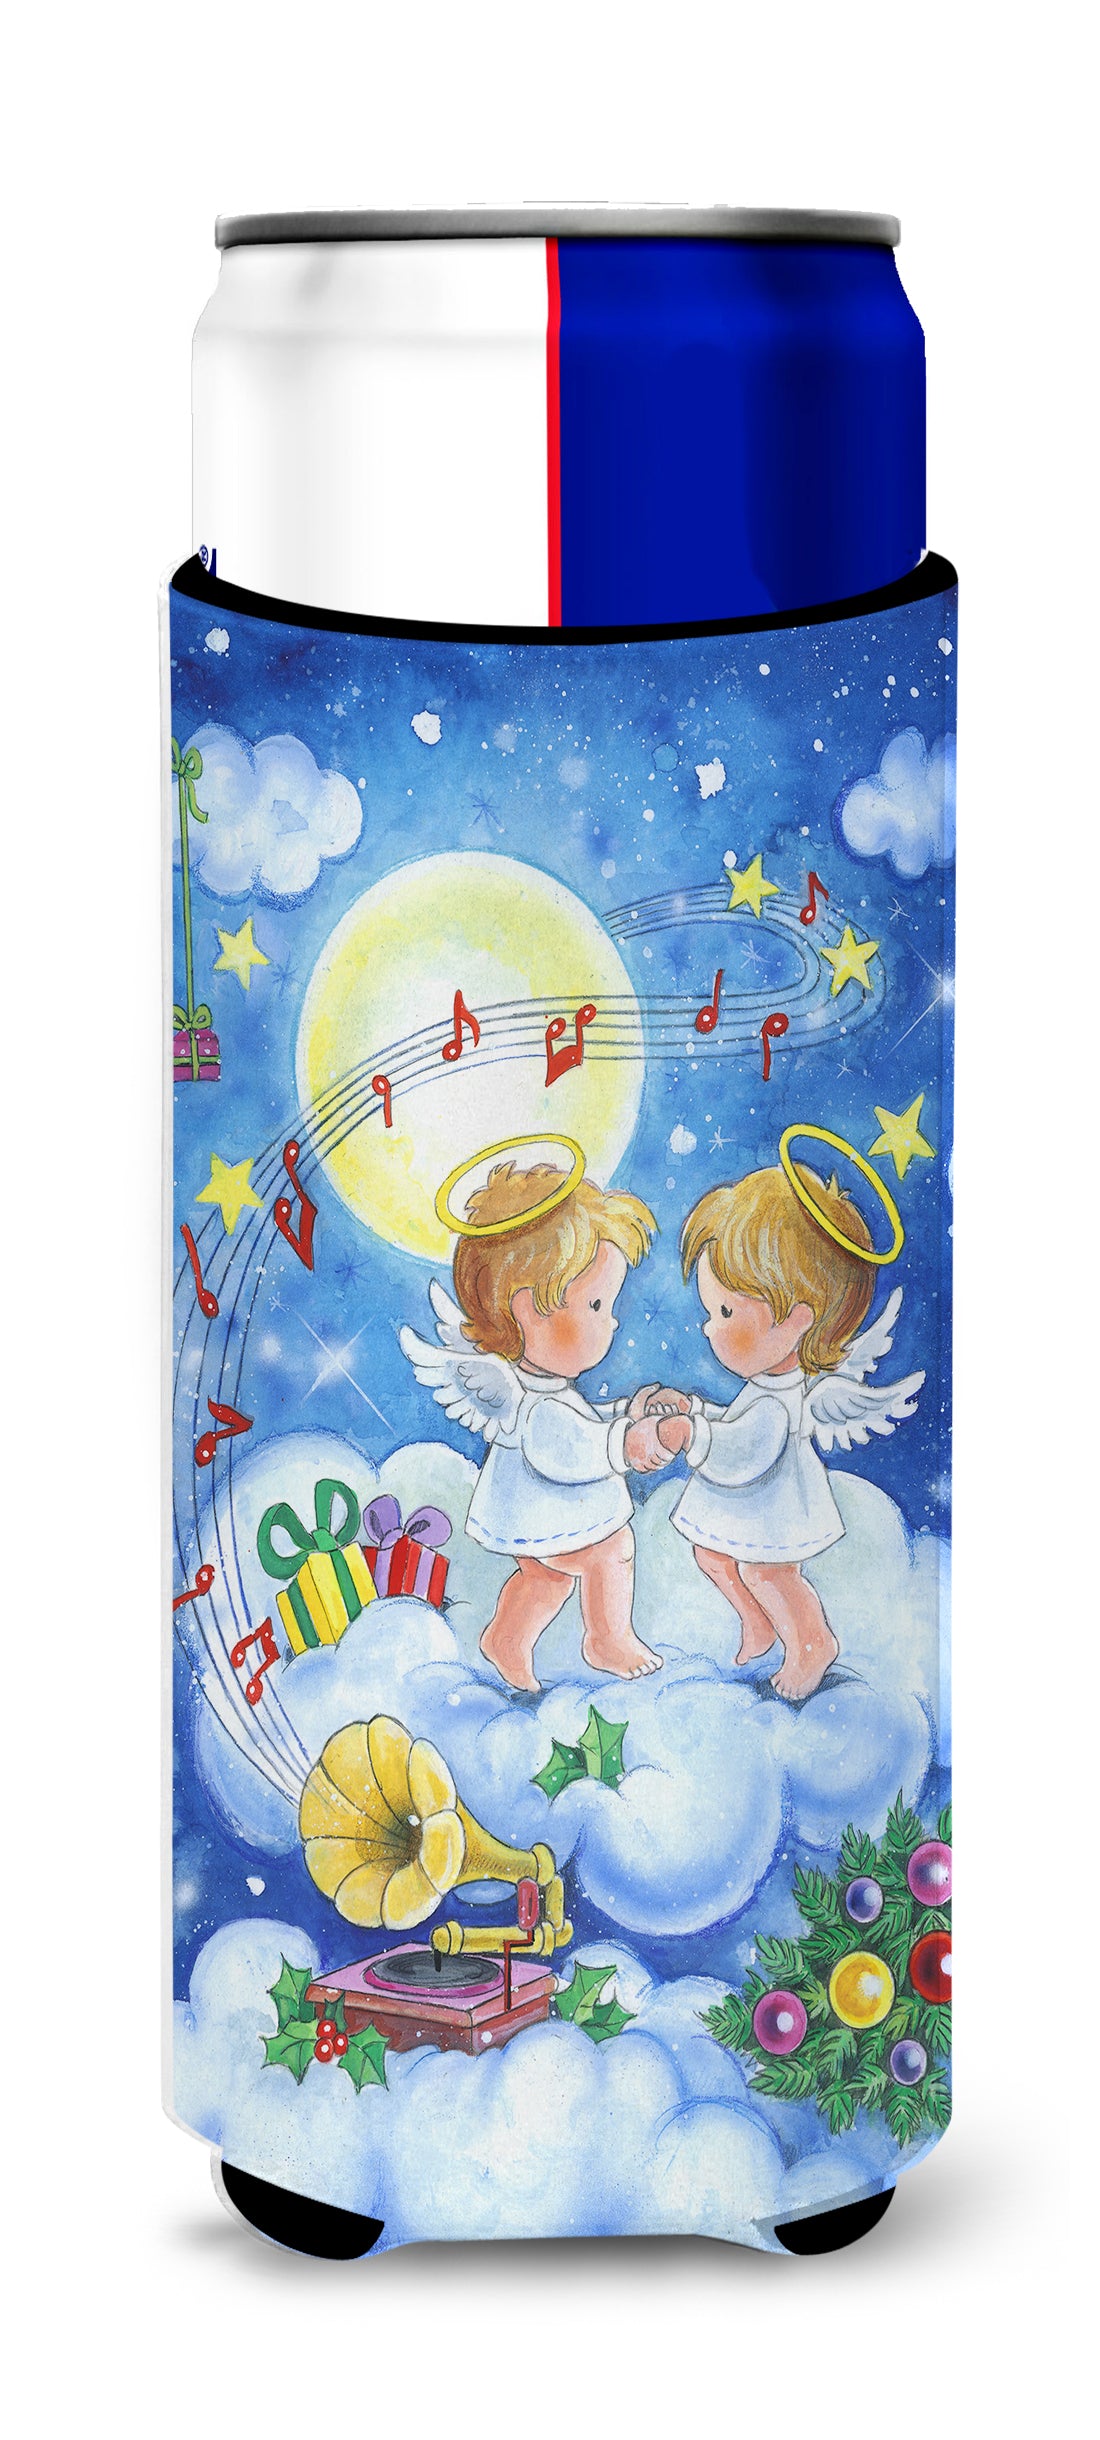 Angels Making Music Together Ultra Beverage Insulators for slim cans APH3790MUK